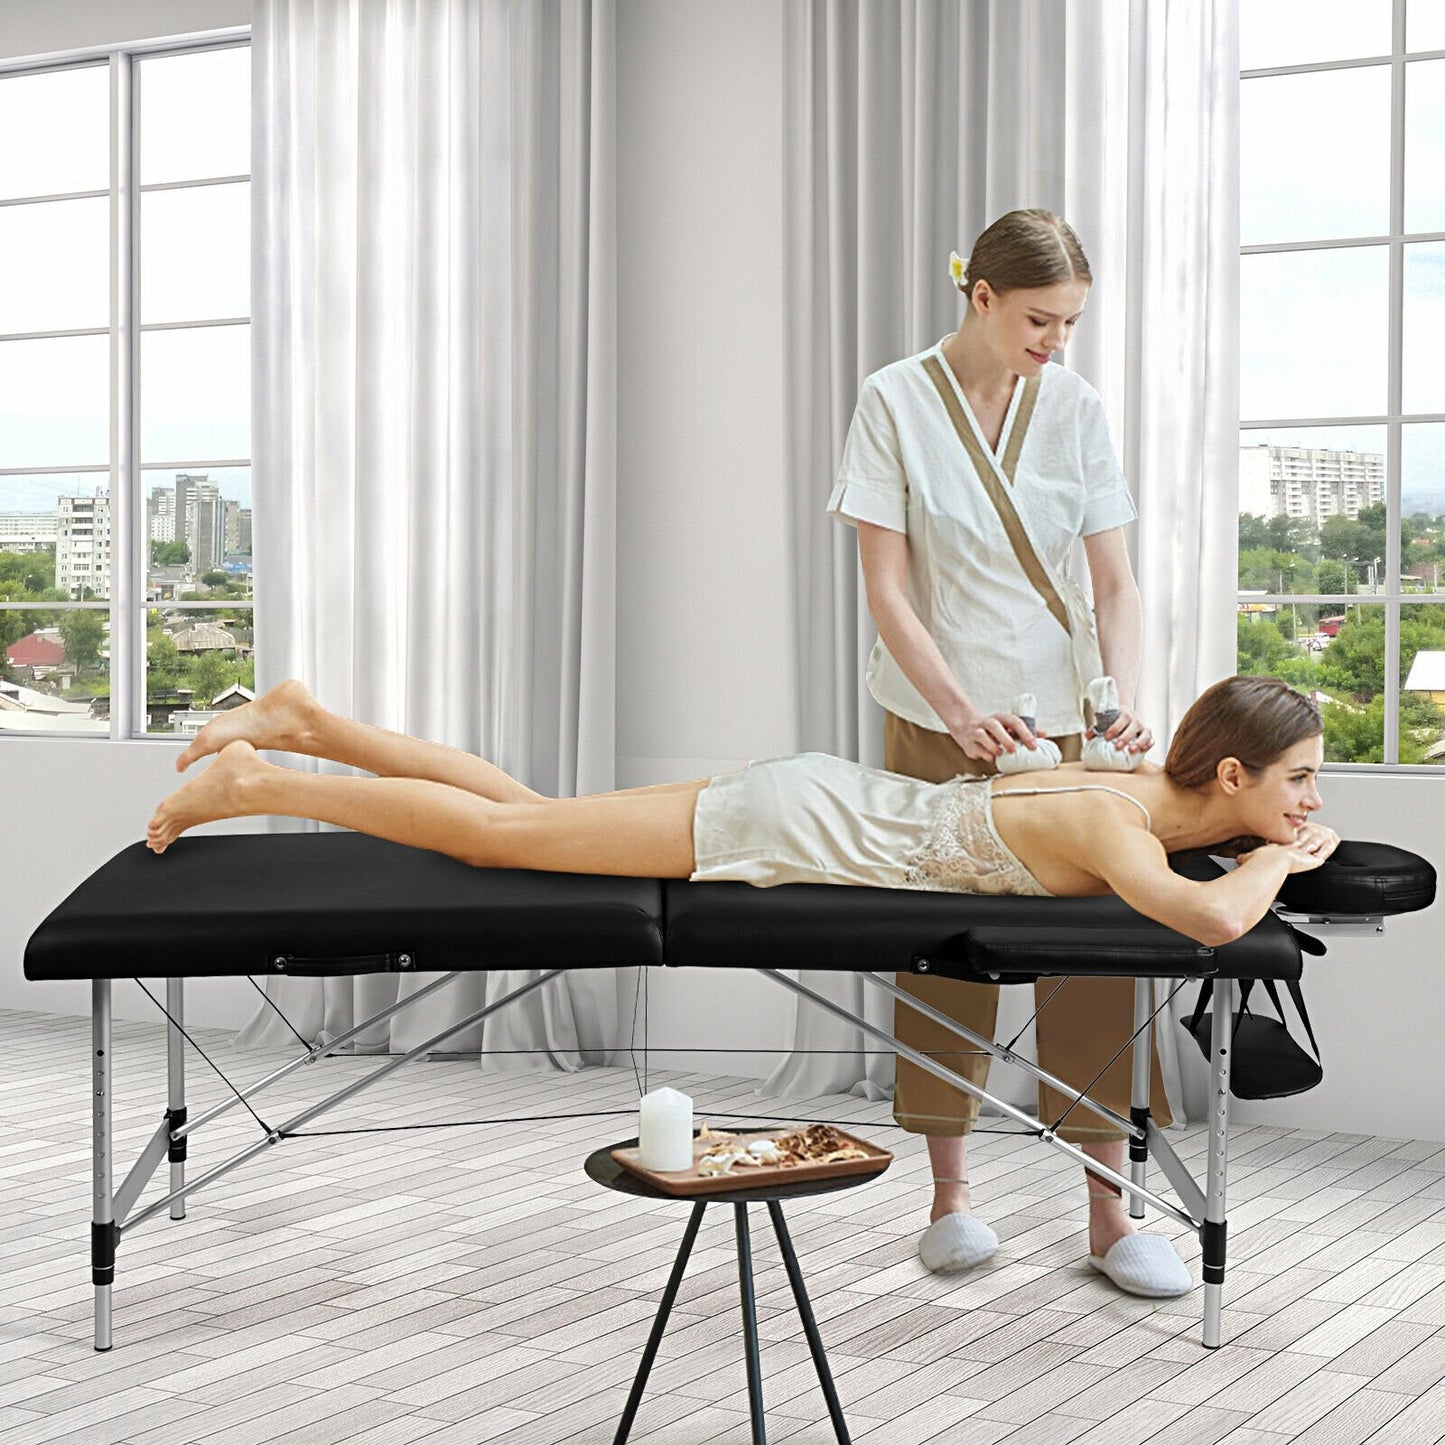 84 Inch L Portable Adjustable Massage Bed with Carry Case for Facial Salon Spa, Black at Gallery Canada